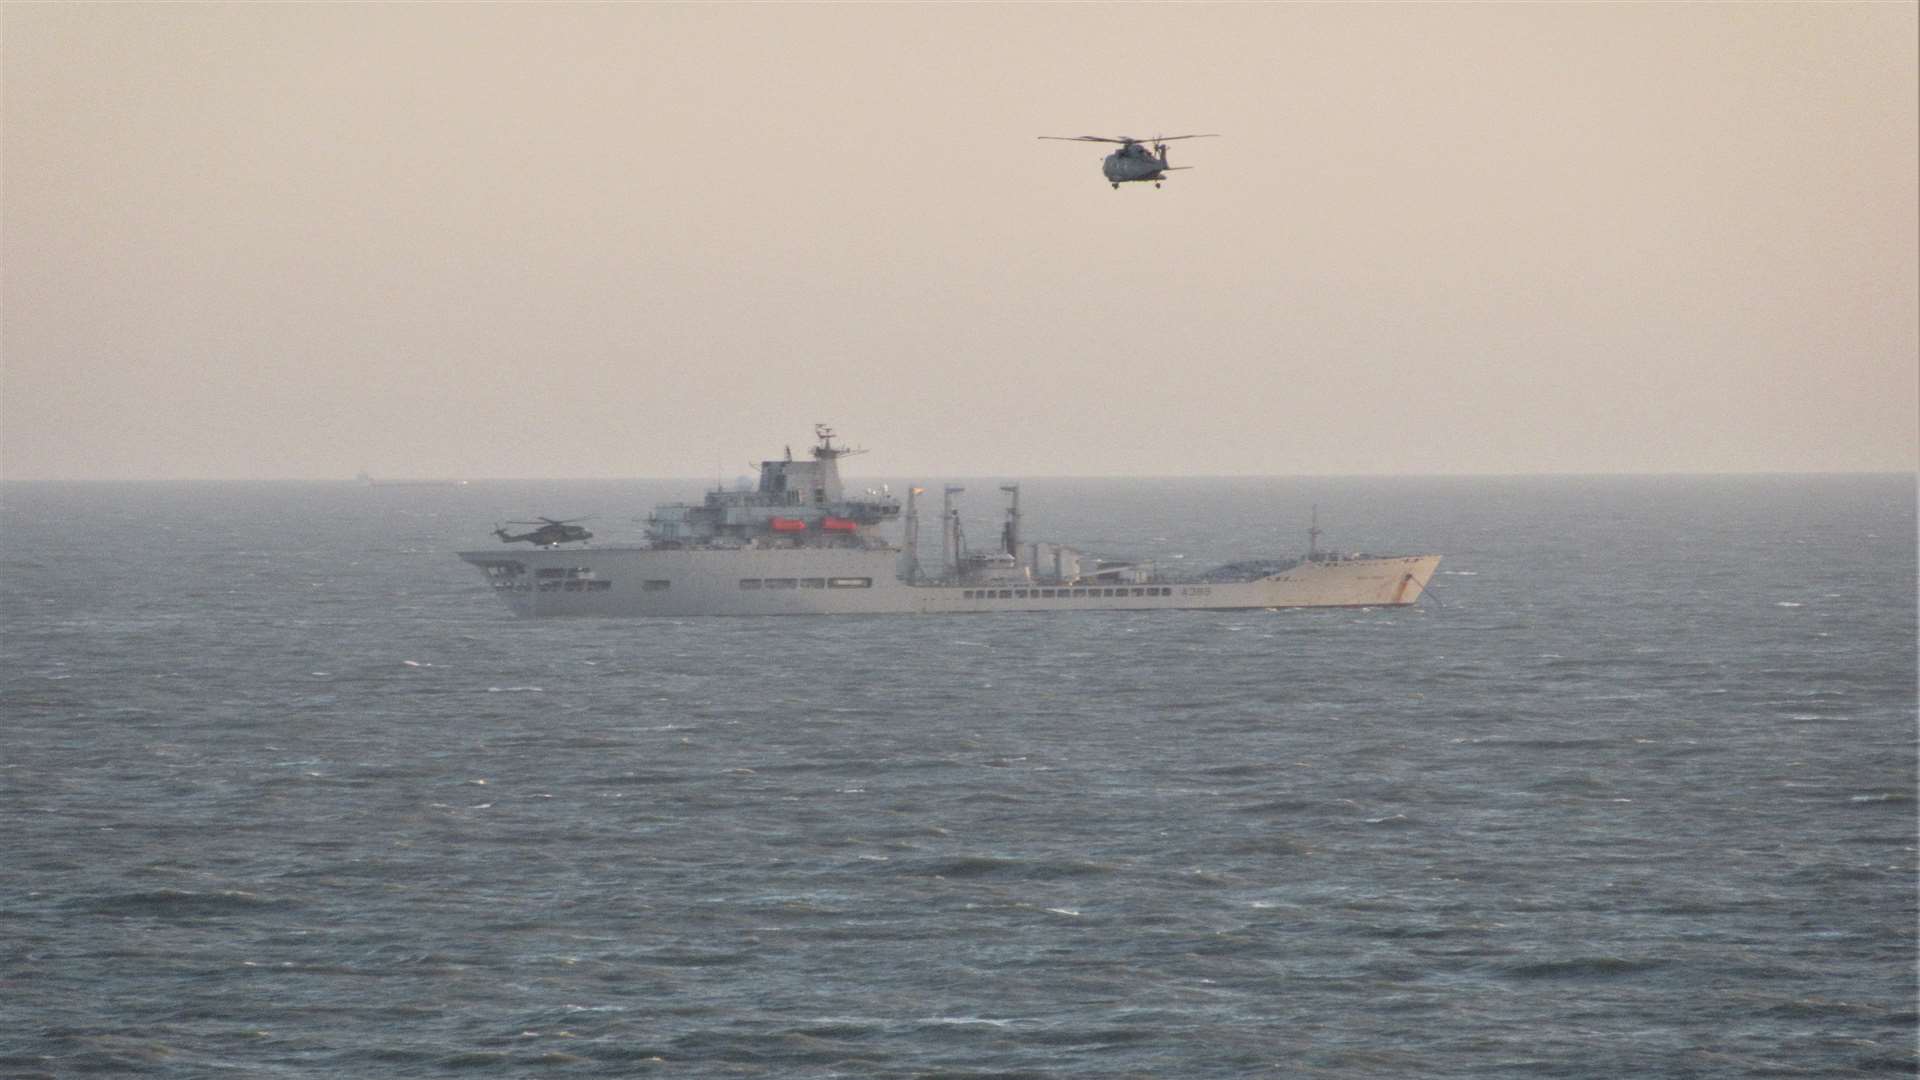 RFA Wave Knight off the Shepway coast operating with two helicopters flying off its deck. Picture: Ted Pragnell